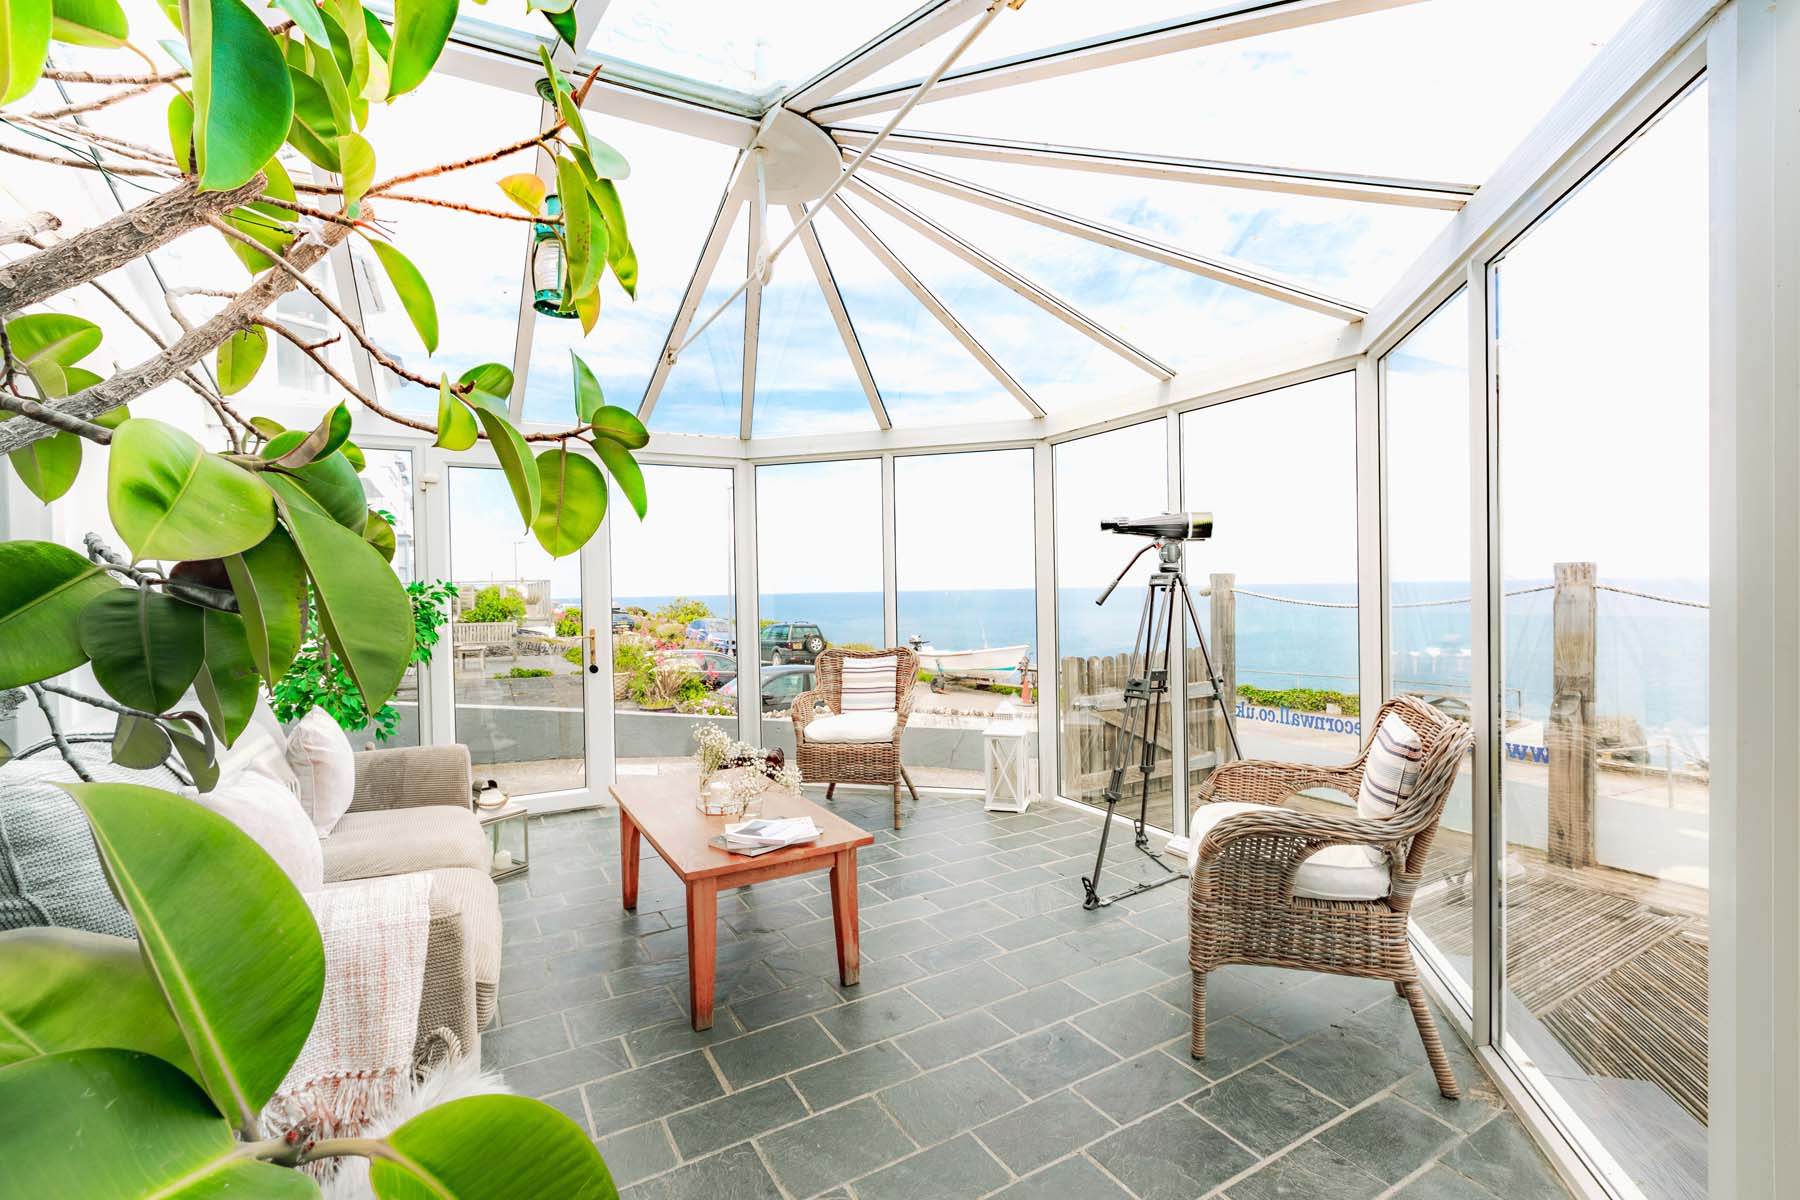 The large conservatory adds plenty of space and a wonderful sea view